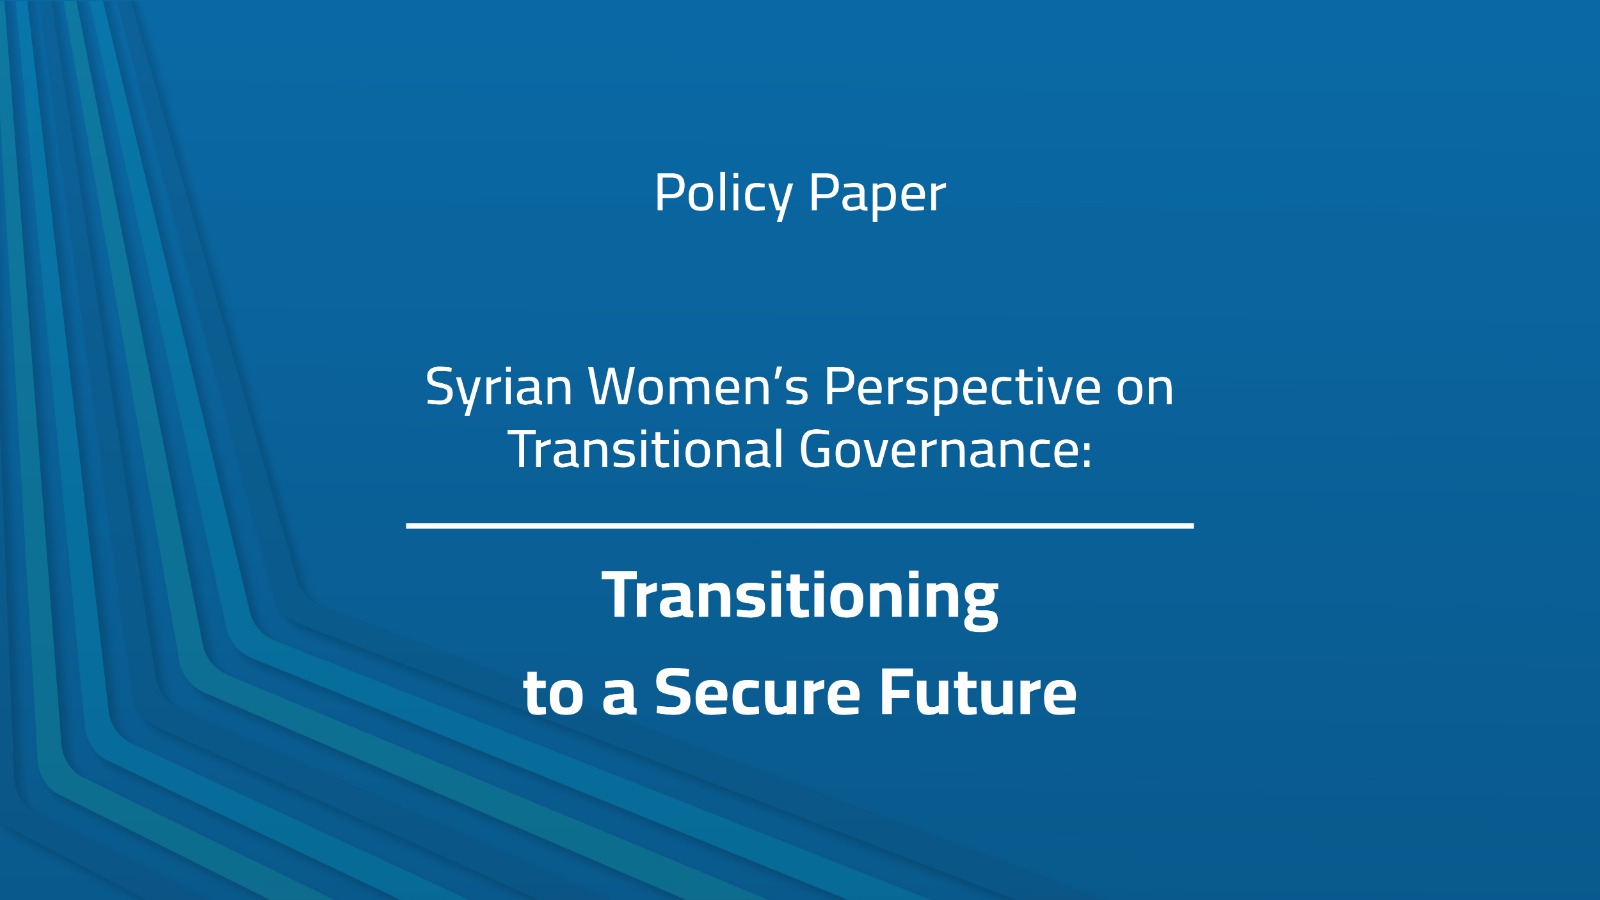 Policy Paper – Syrian Women’s Perspective on Transitional Governance: Transitioning to a Secure Future